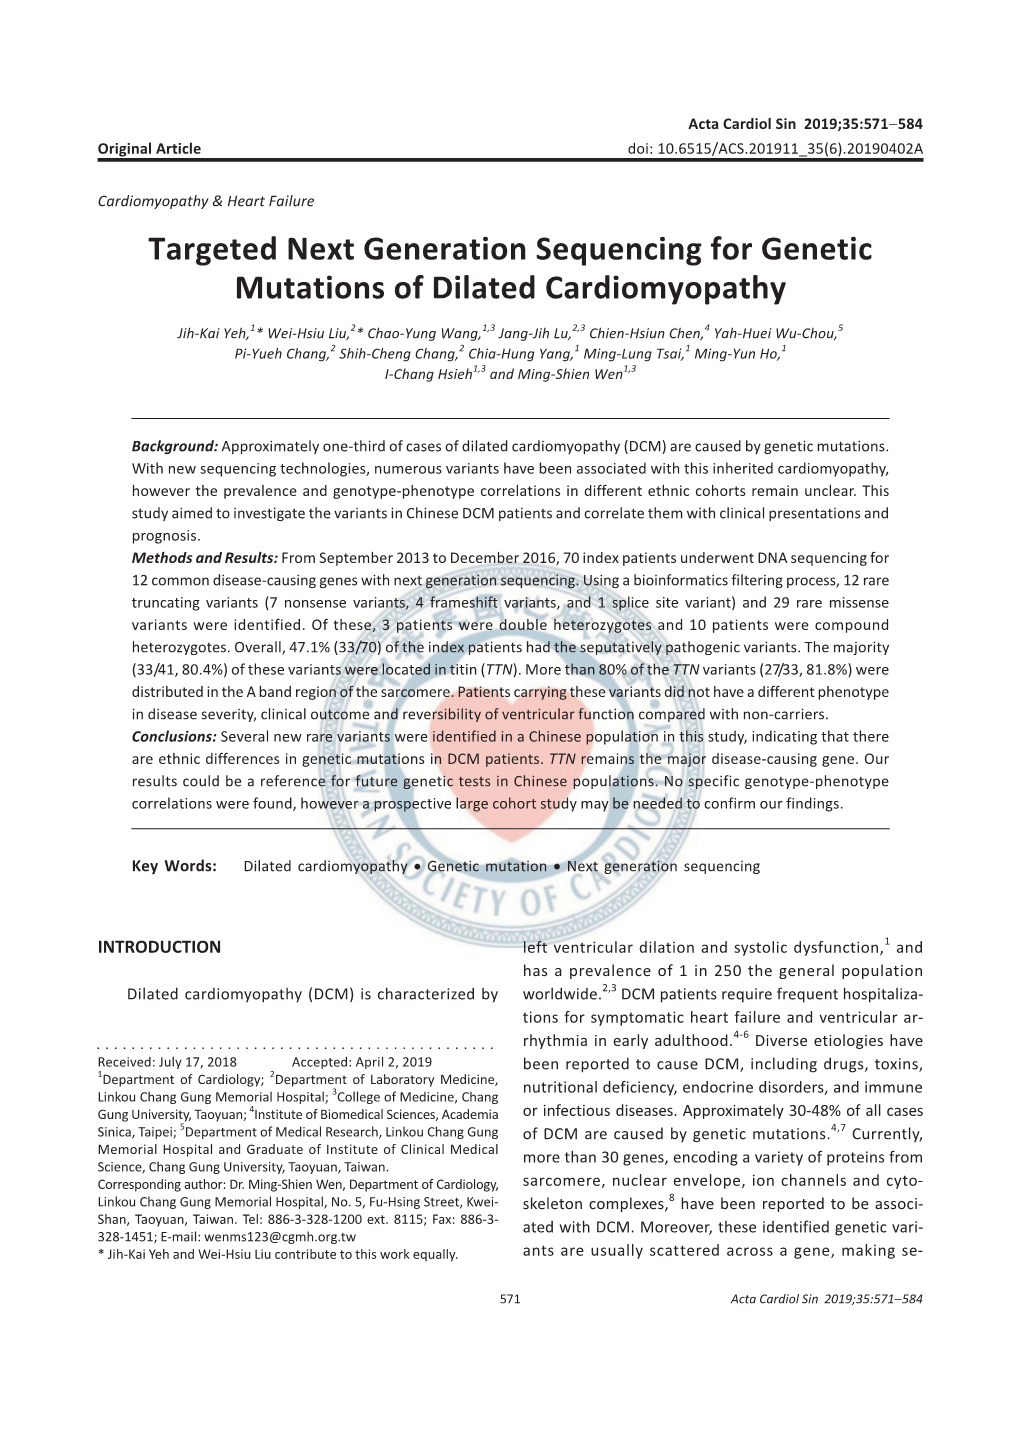 Targeted Next Generation Sequencing for Genetic Mutations of Dilated Cardiomyopathy